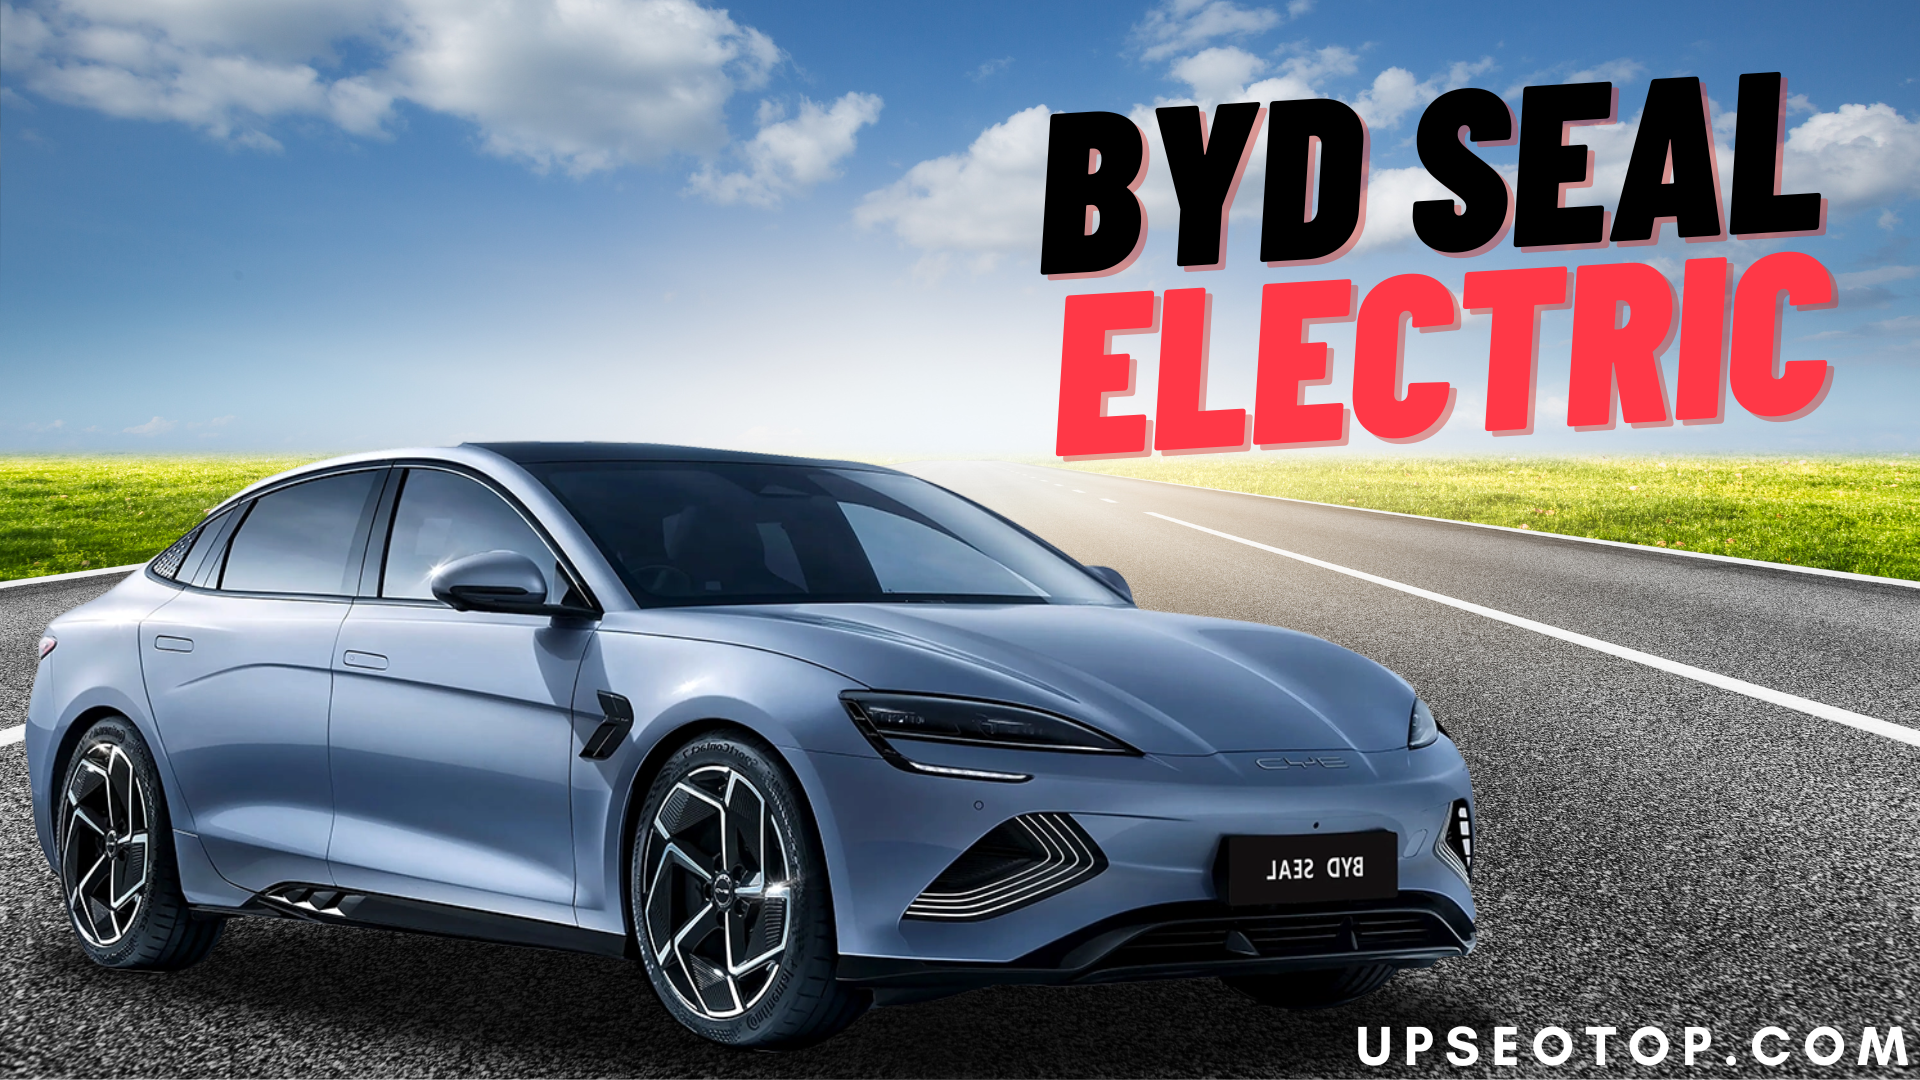 BYD Seal Electric 